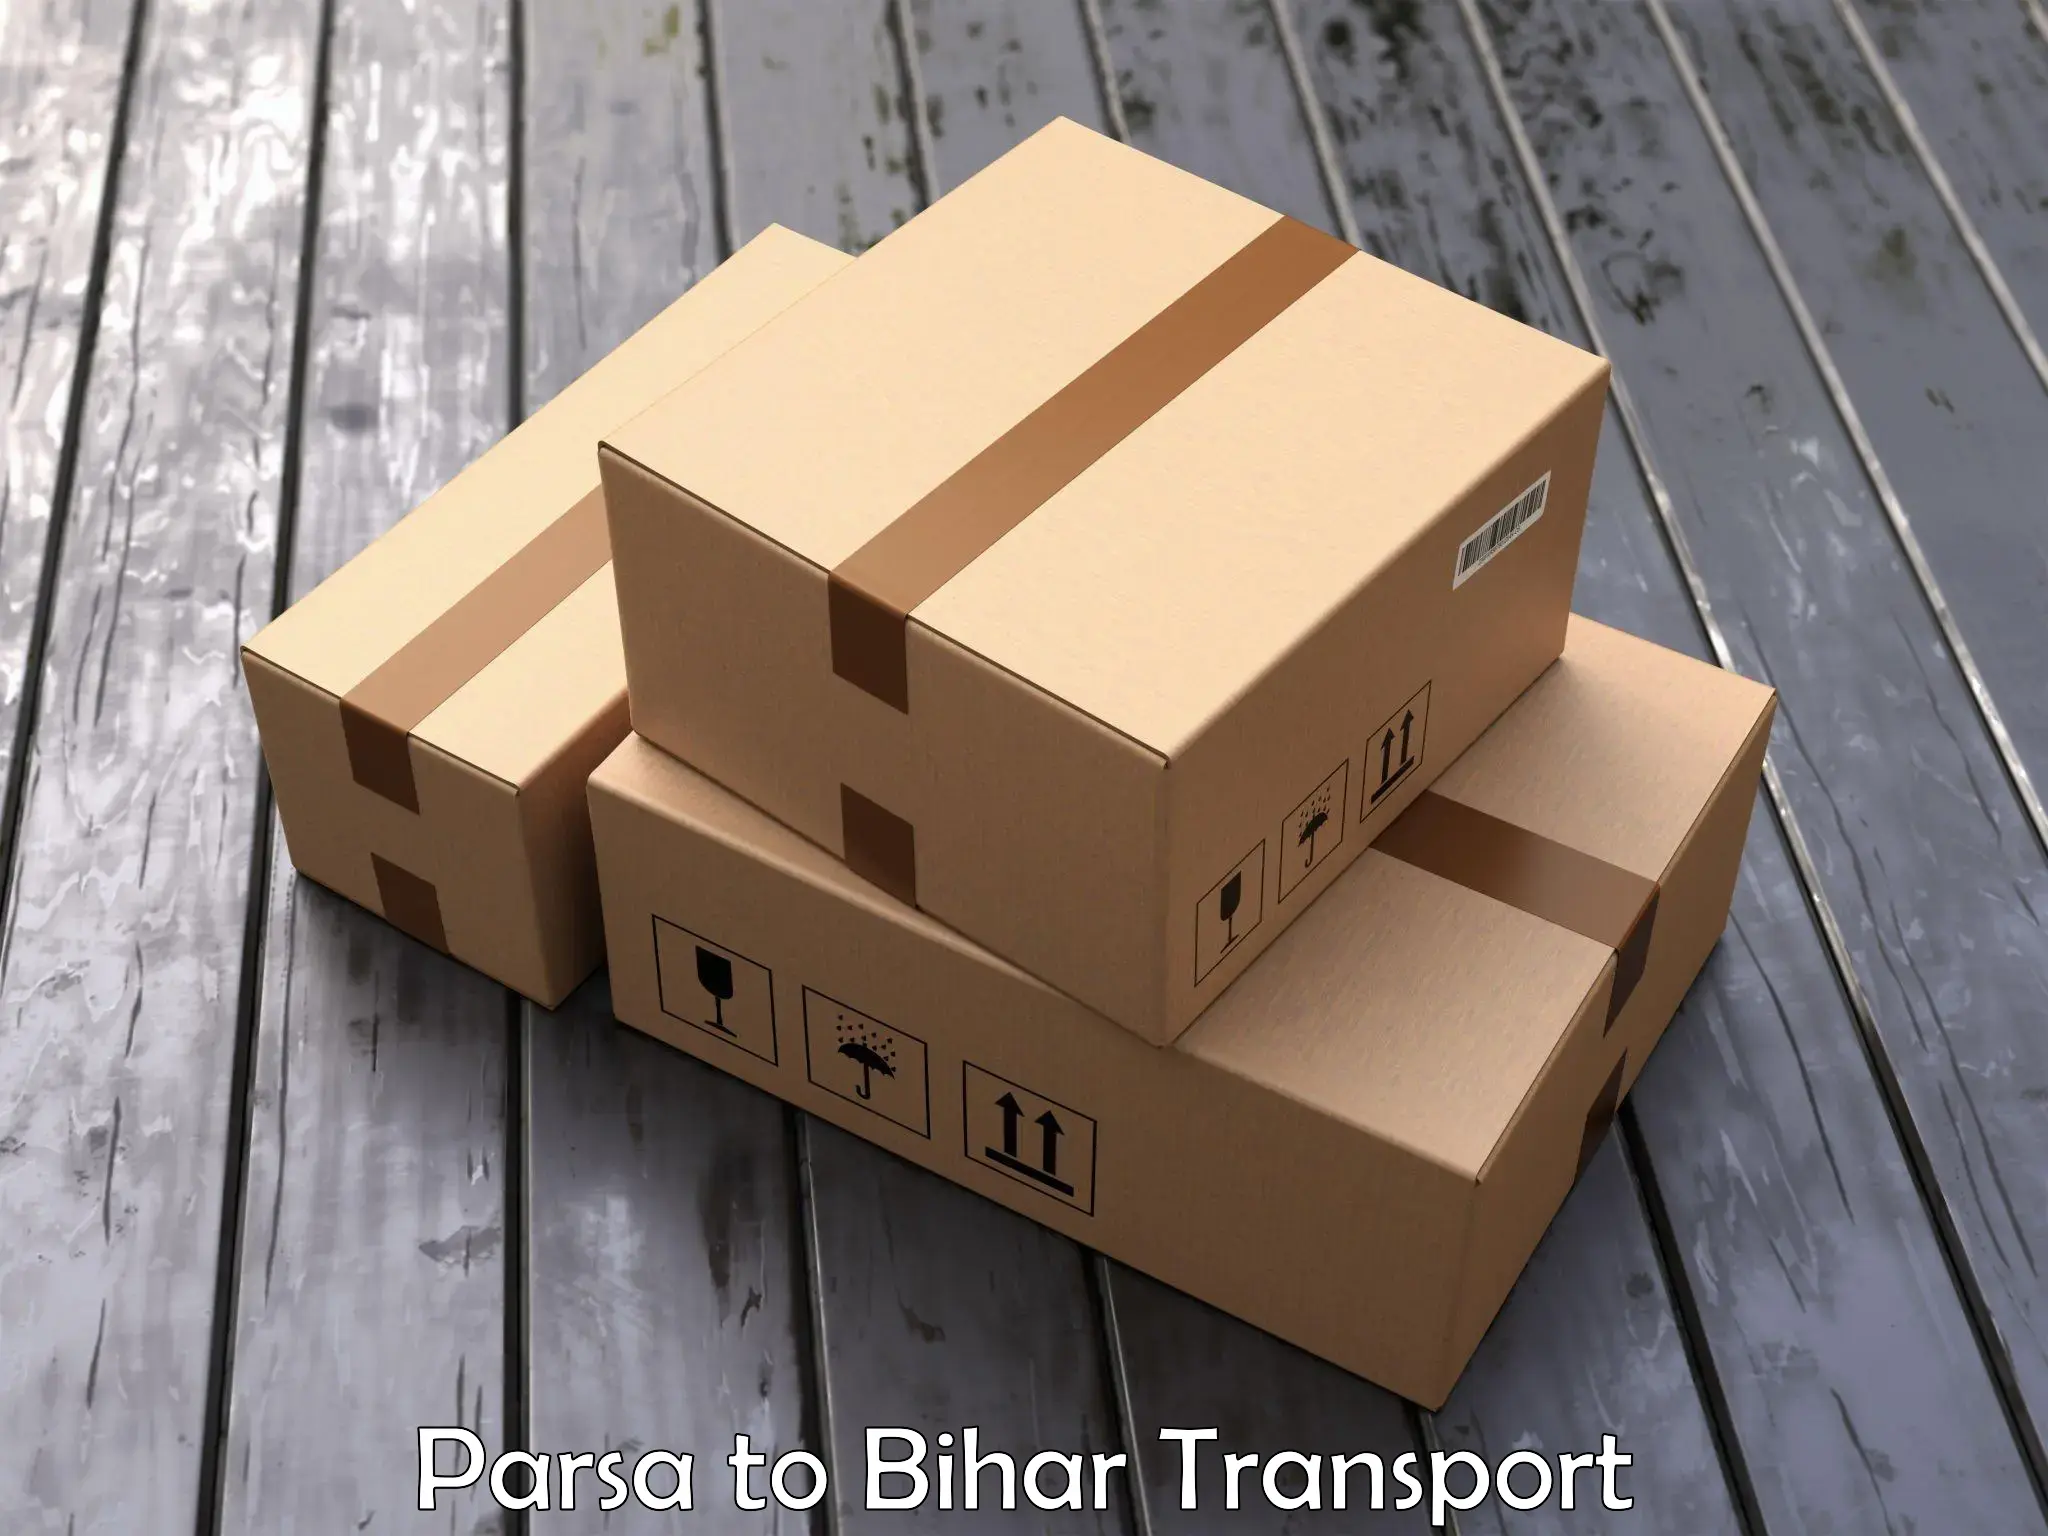 Daily transport service Parsa to Piro